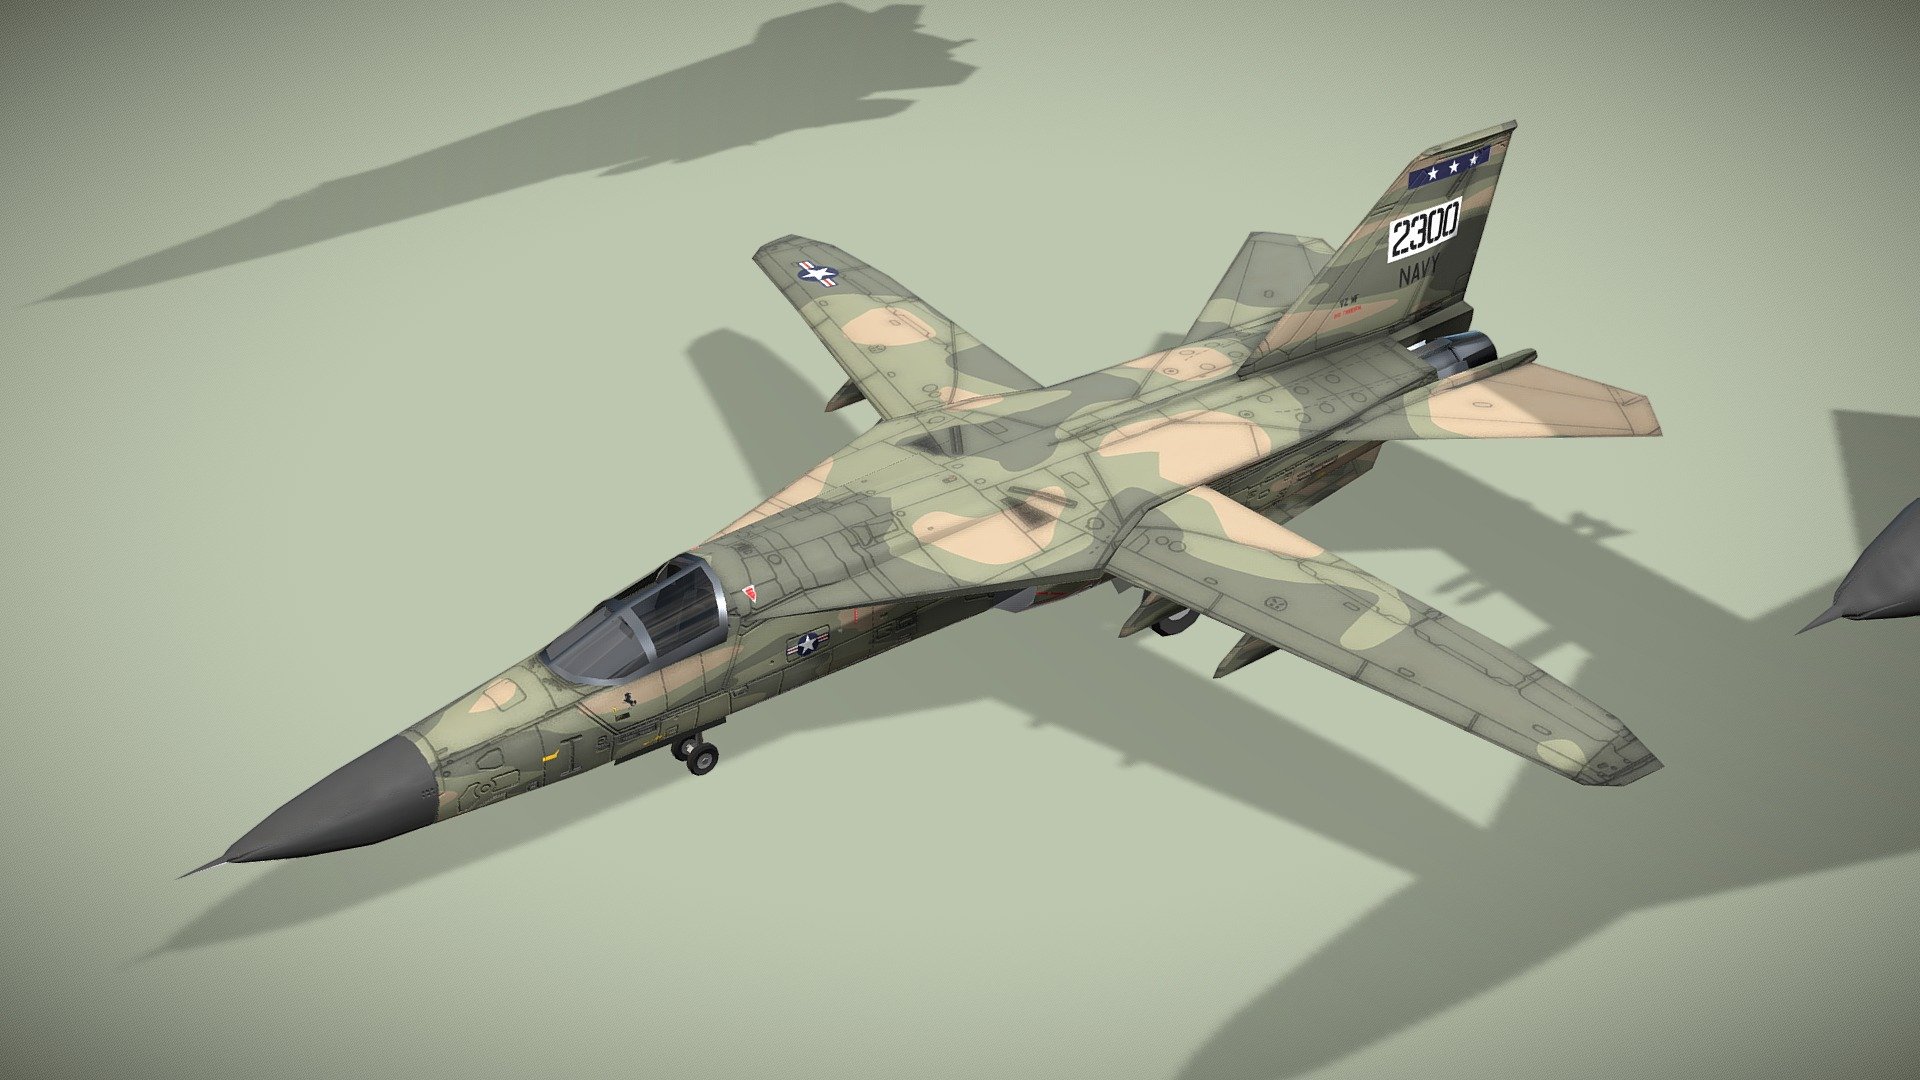 General Dynamics F-111 Aardvark

Lowpoly model of american jet fighter



General Dynamics F-111 Aardvark is a retired supersonic, medium-range, multirole combat aircraft. Production variants of the F-111 had roles that included ground attack (e.g. interdiction), strategic bombing (including nuclear weapons capabilities), reconnaissance and electronic warfare. The F-111 pioneered several technologies for production aircraft, including variable-sweep wings, afterburning turbofan engines, and automated terrain-following radar for low-level, high-speed flight. Its design influenced later variable-sweep wing aircraft, and some of its advanced features have since become commonplace. The F-111 suffered a variety of problems during initial development



1 standing versionand 2 flying versions on set

Model has bump map, roughness map and 3 x diffuse textures



Check also my other aircrafts and cars

Patreon with monthly free model - General Dynamics F-111 Aardvark - Buy Royalty Free 3D model by NETRUNNER_pl 3d model